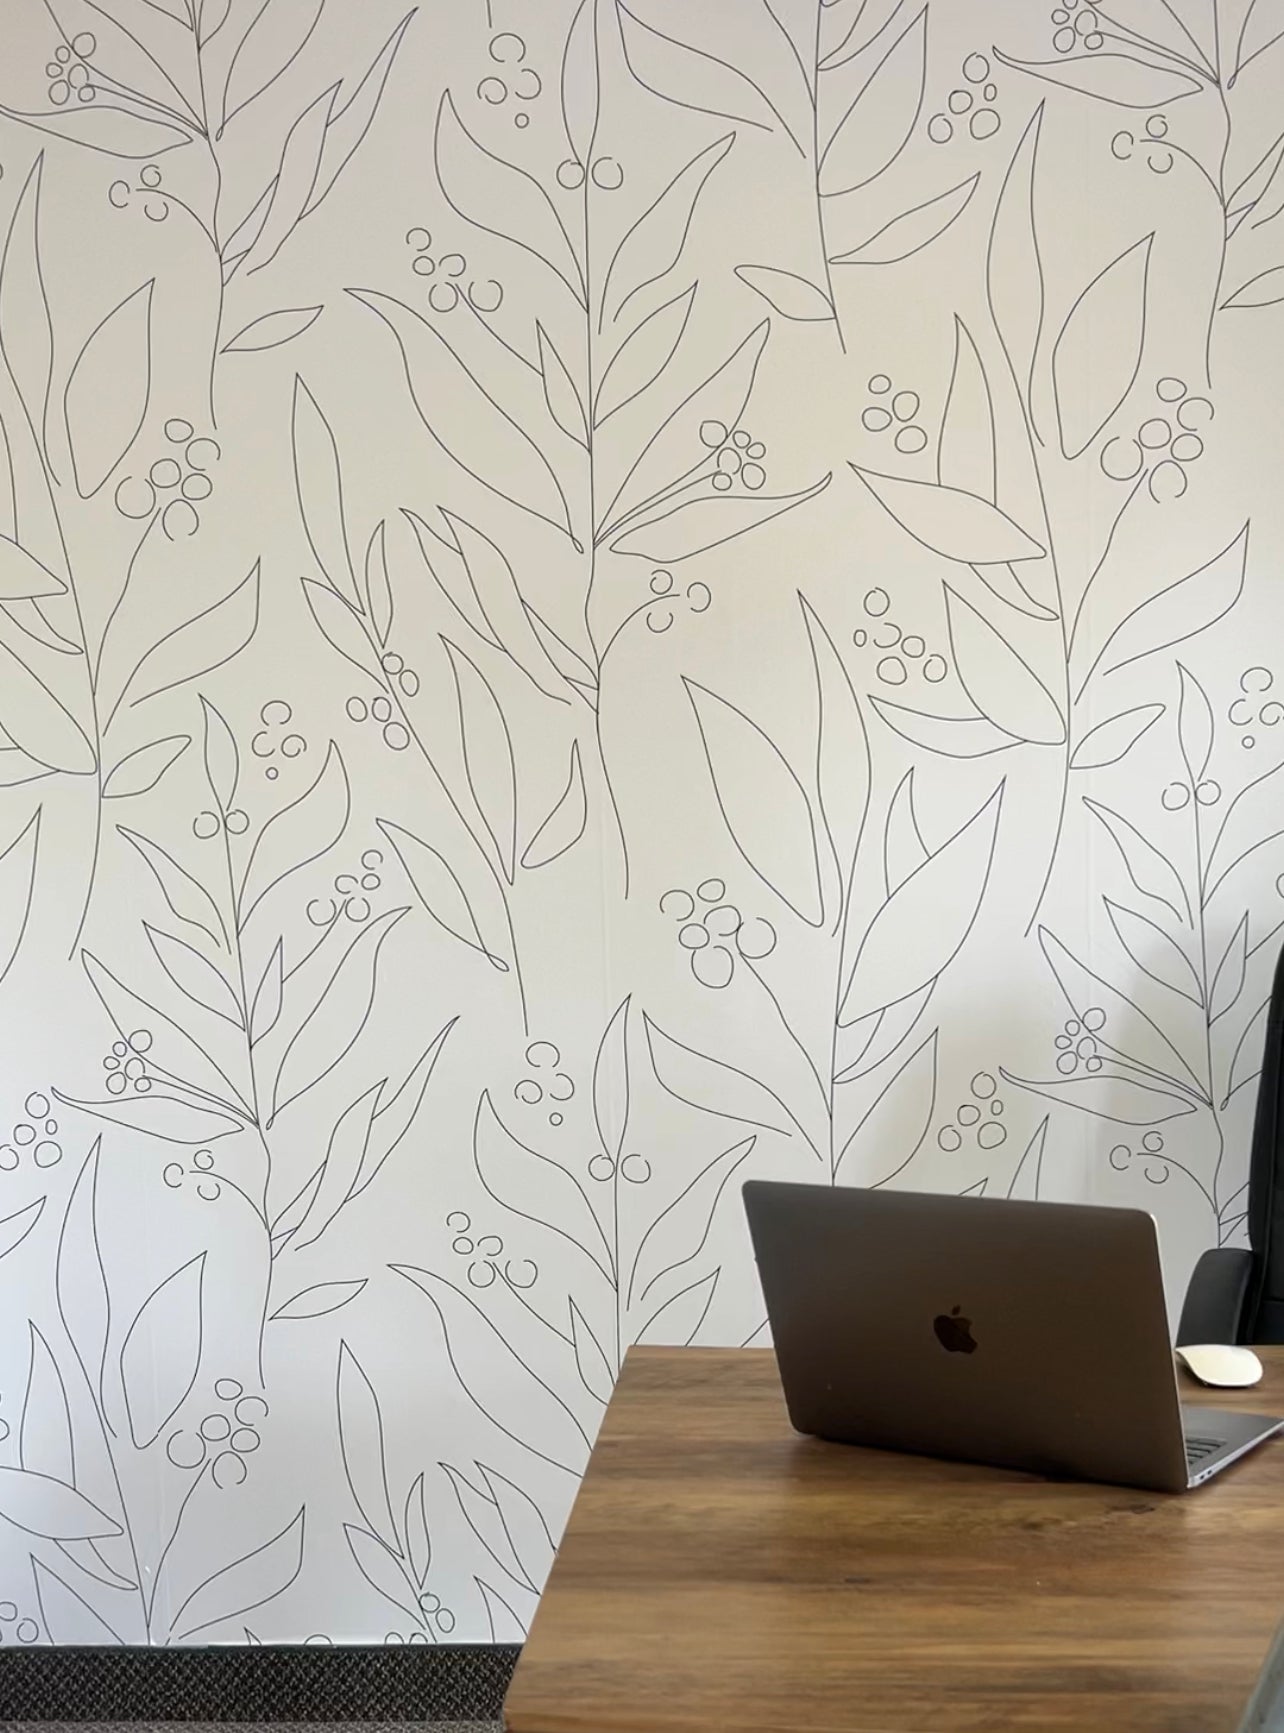 A modern office setup with a wooden desk, an open laptop, and a black office chair. The wall features white wallpaper with a delicate black abstract floral pattern, creating a stylish and professional atmosphere.